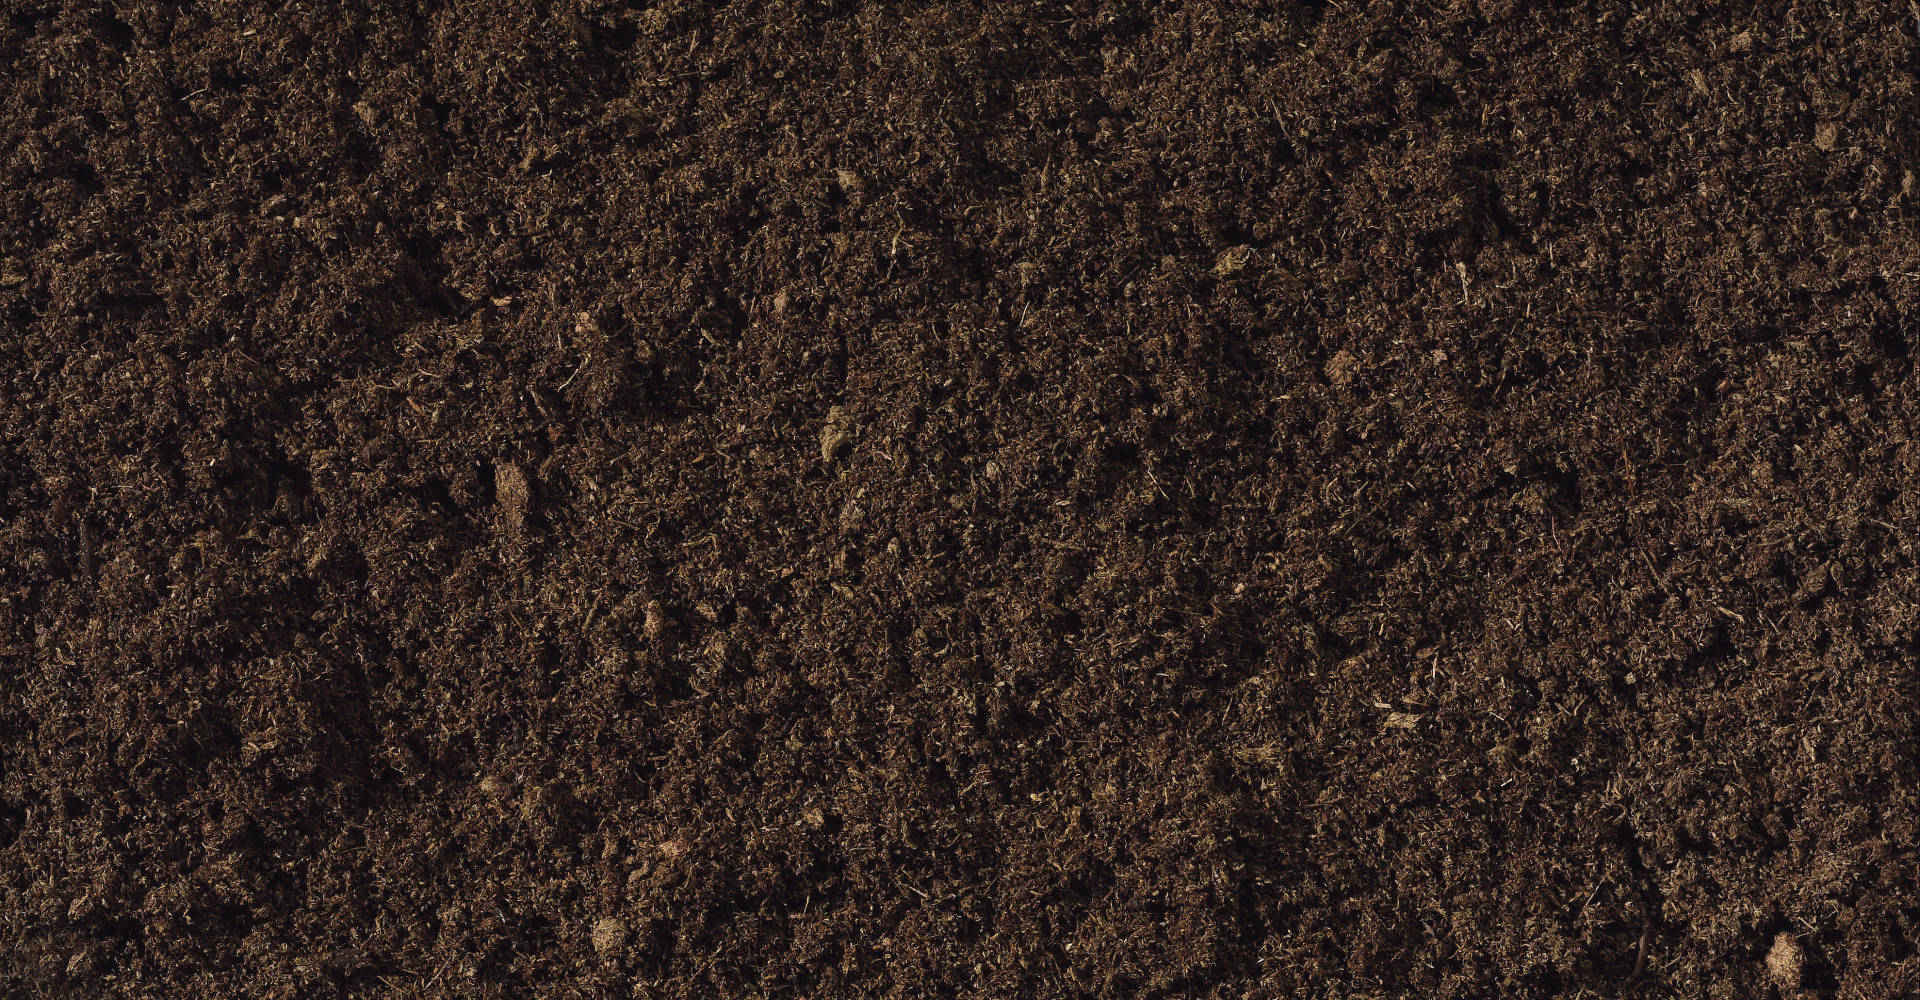 Brown rich compost or soil.